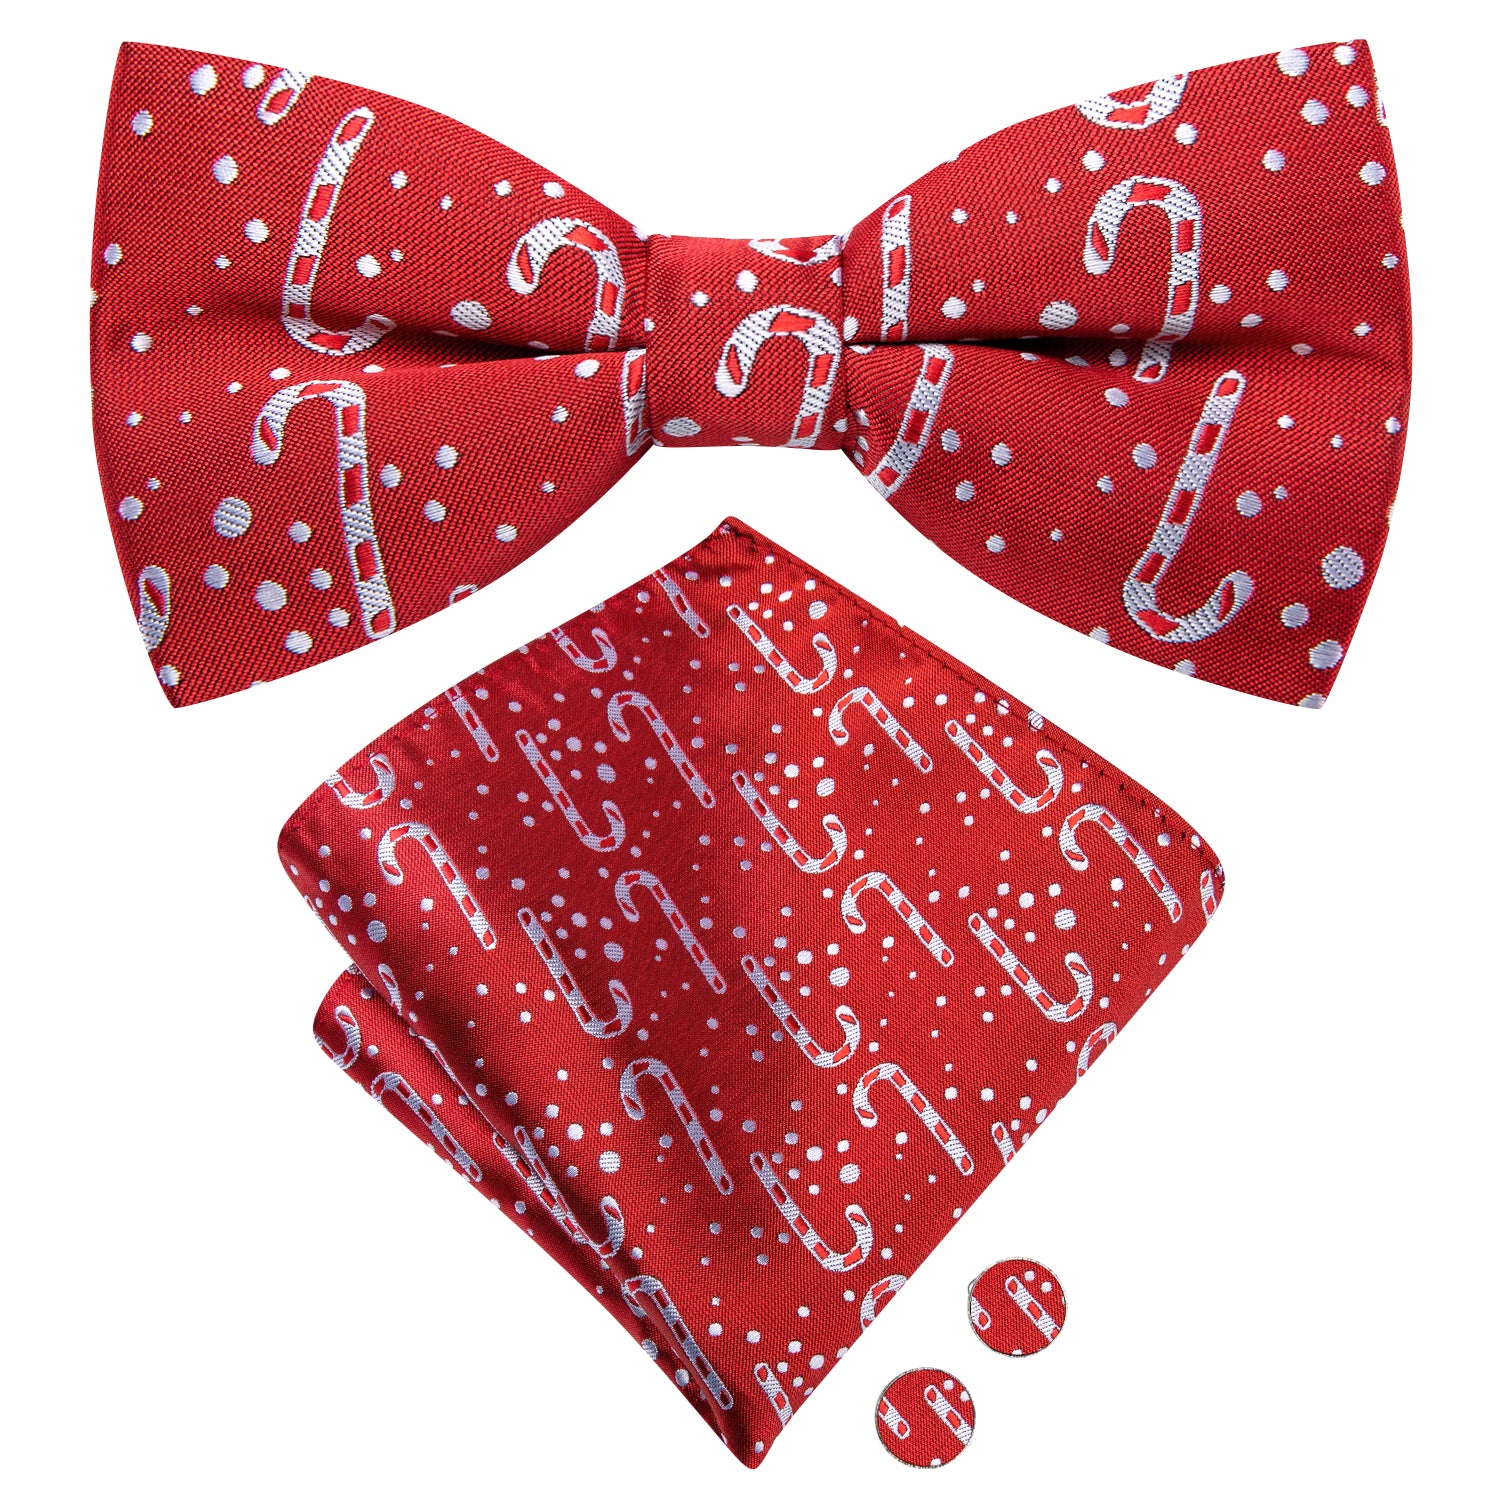 Christmas Red Candy Cane Novelty Pre-tied Bow Tie Hanky Cufflinks Set